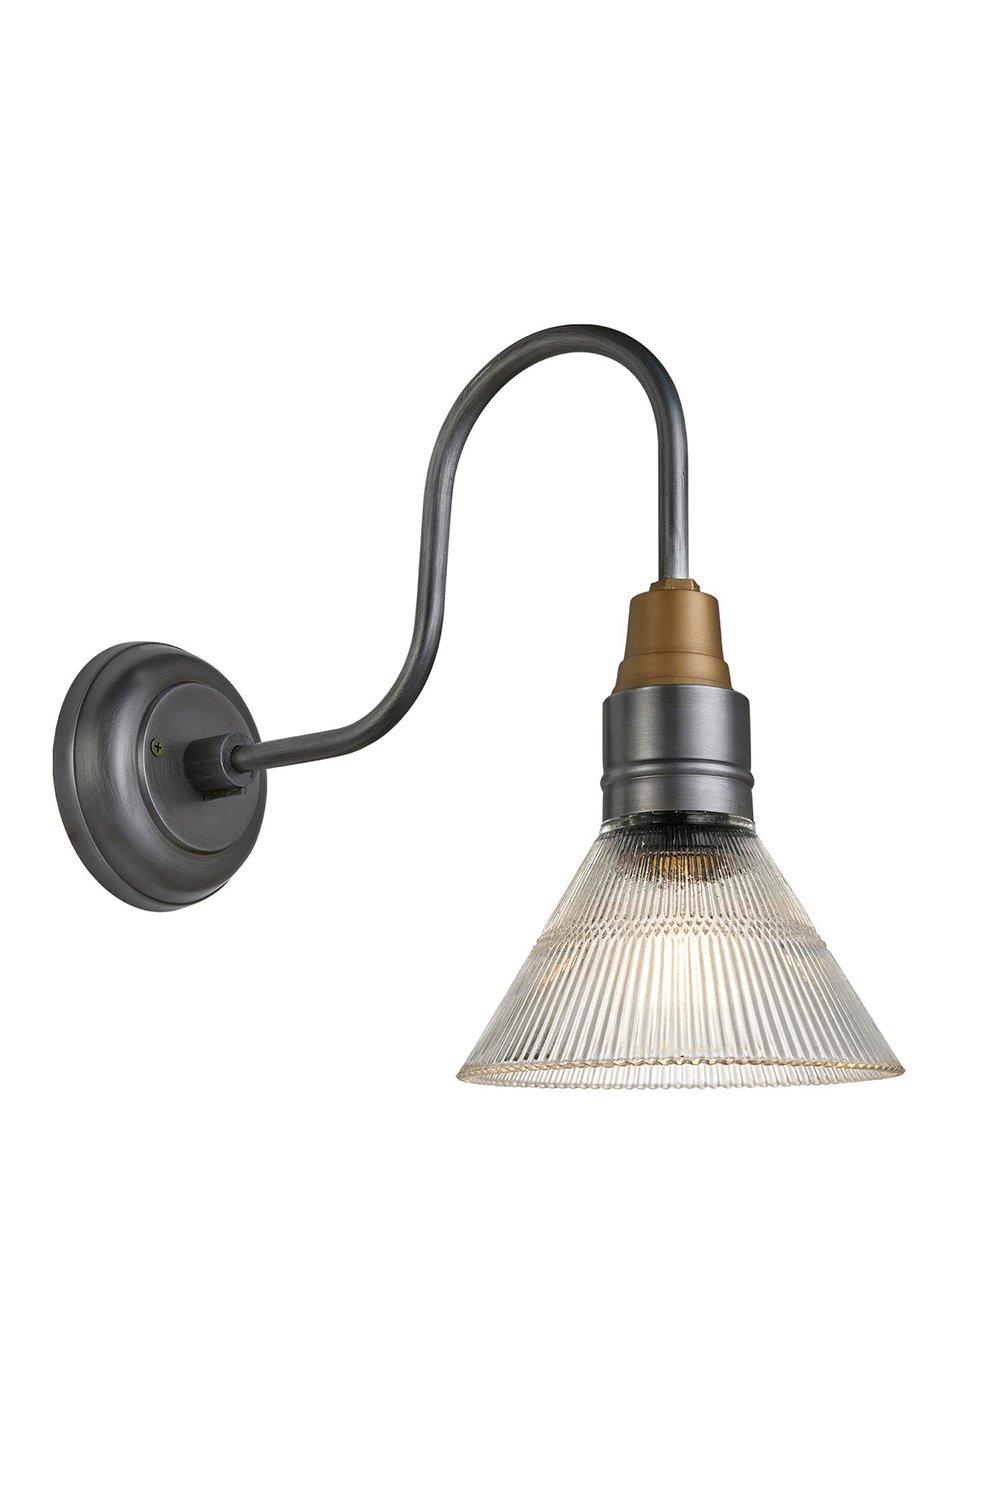 Swan Neck Glass Funnel Wall Light, 7 Inch, Pewter